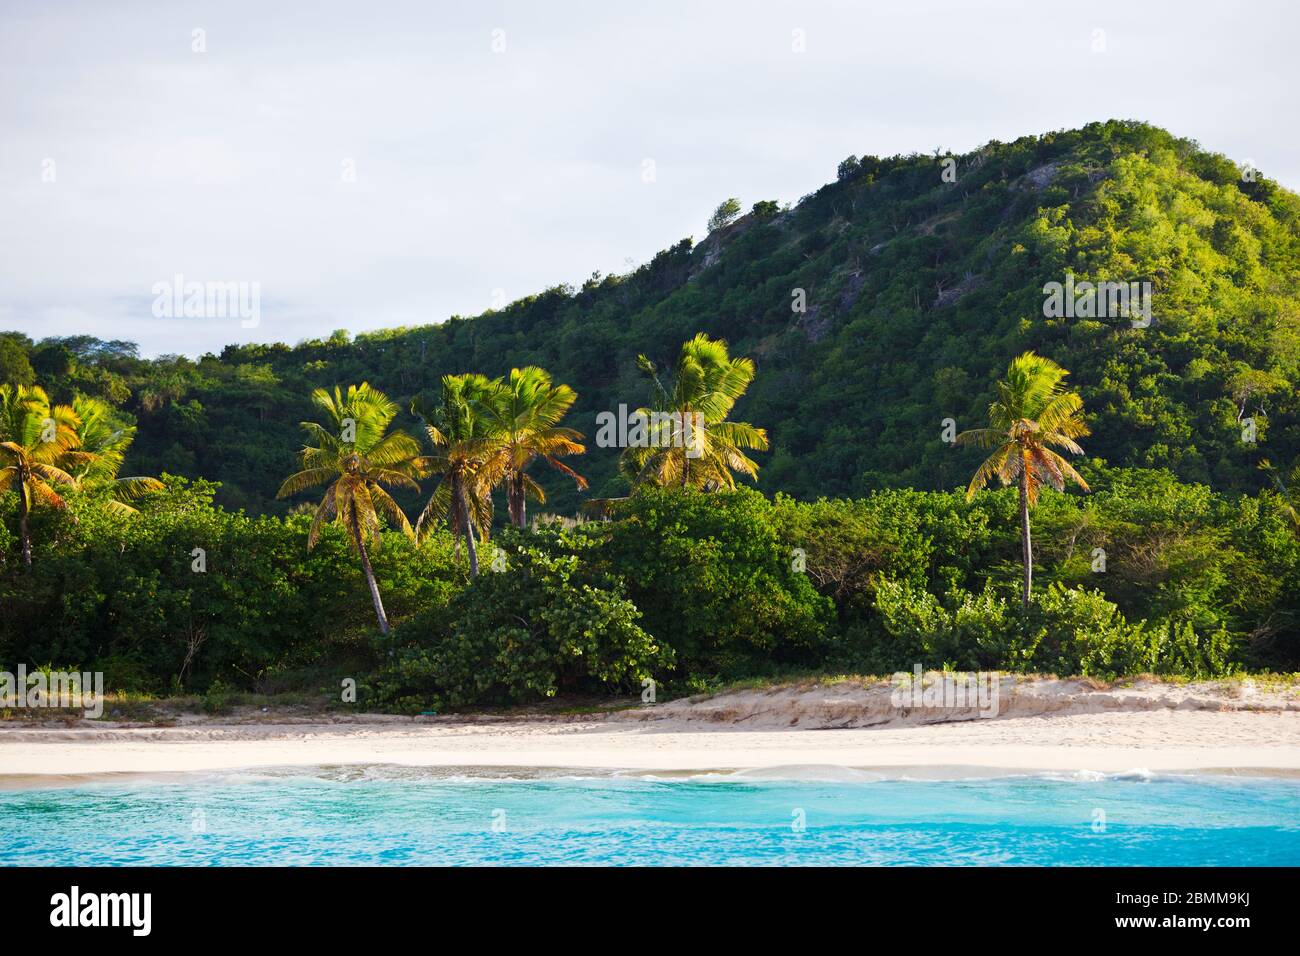 A pristine caribbean beach with palm trees seen from a boat. Stock Photo